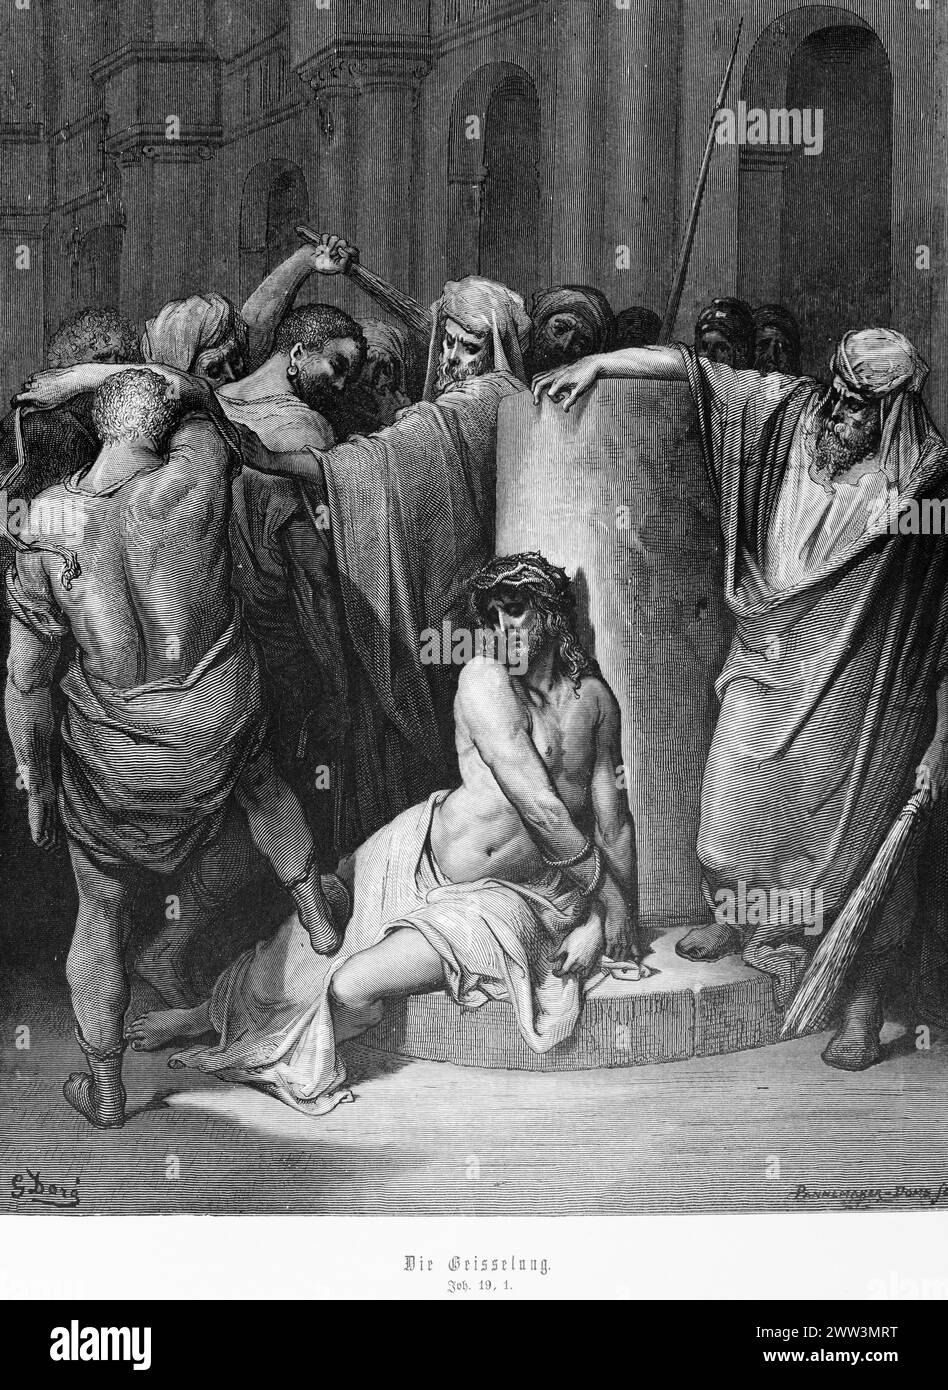 The scourging of Jesus, Gospel of John, chapter 19, Pilate, thorns, crown, beat, scourge, agony, pain, sticks, king, Jews, New Testament, Bible Stock Photo